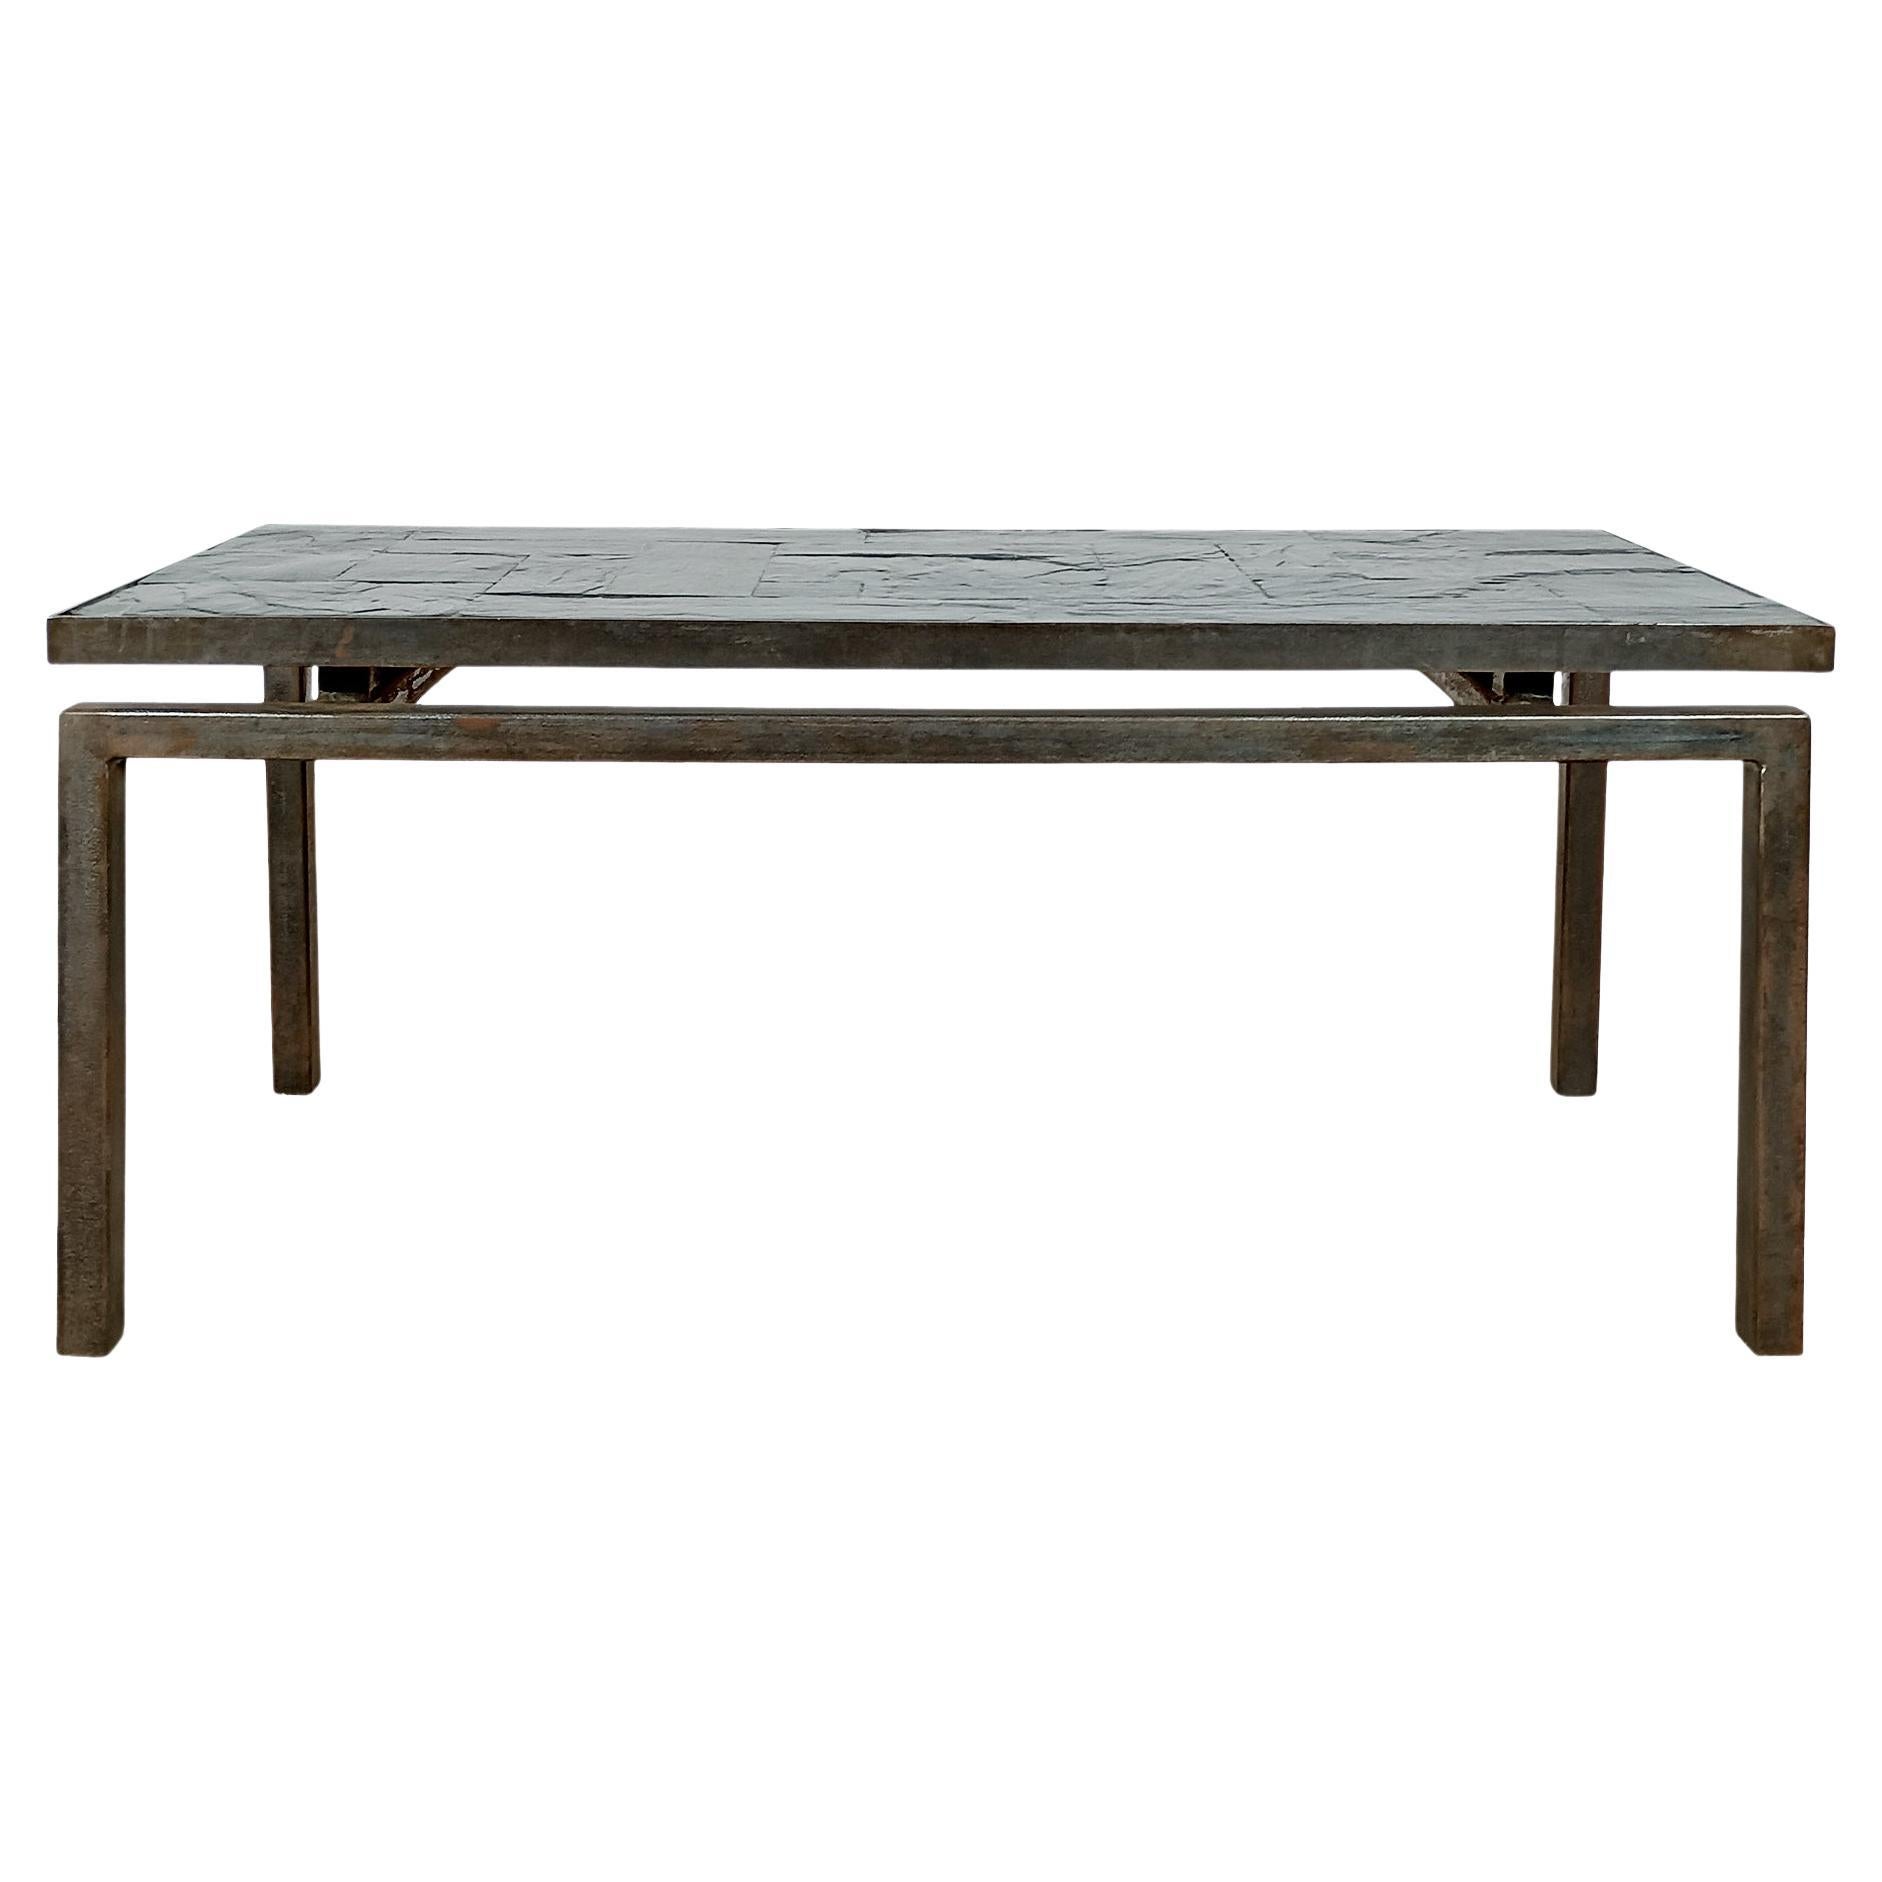 Mid-Century Modern Thick Slate Coffee Table In A Steel Frame - France, 1970 For Sale